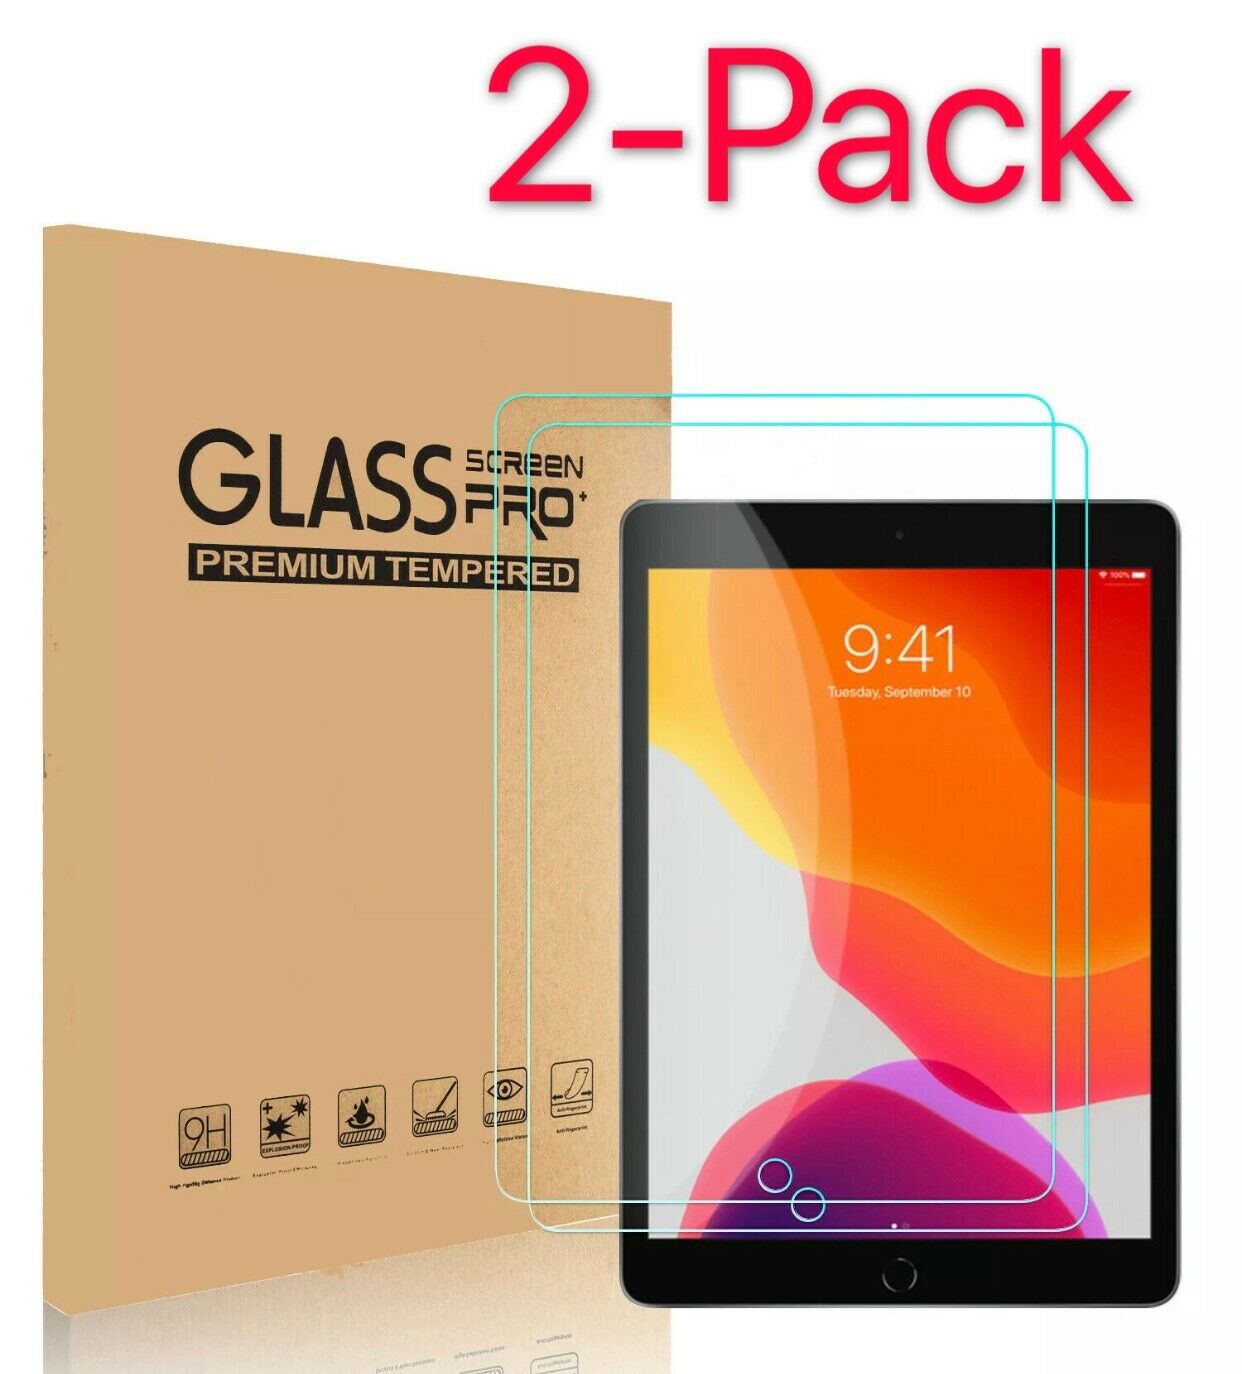 2-pack Tempered Glass Screen Protector For Ipad 2 3 4 Air Pro 9.7"10.2‘10.5" 11"